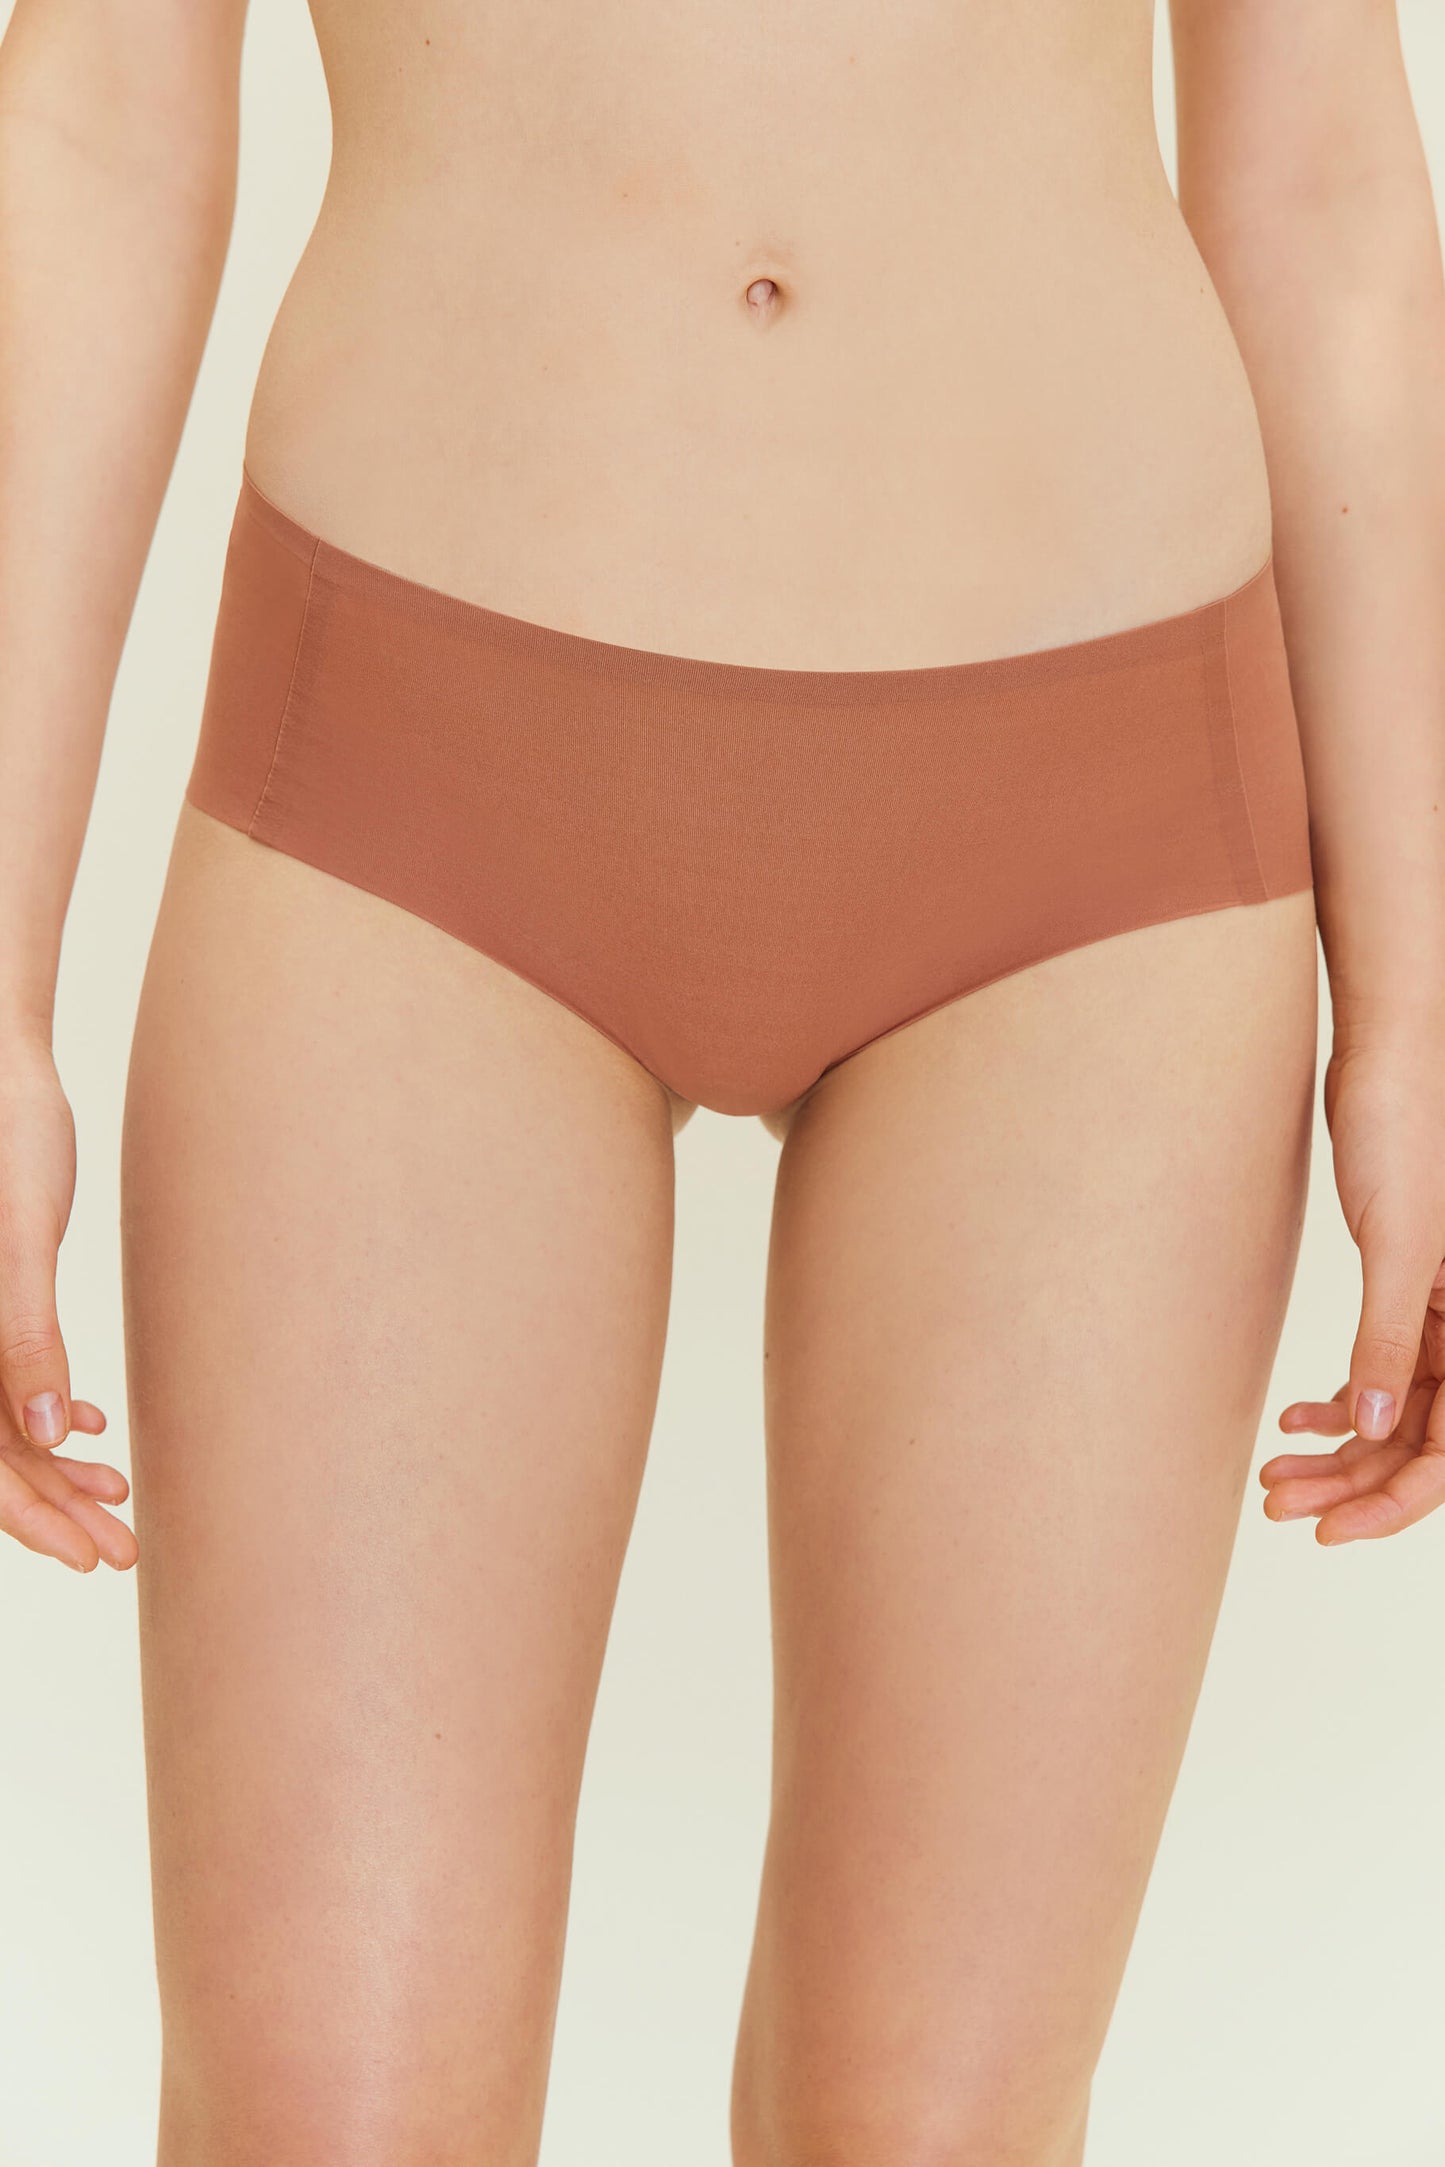 Front view of woman wearing rust-colored underwear